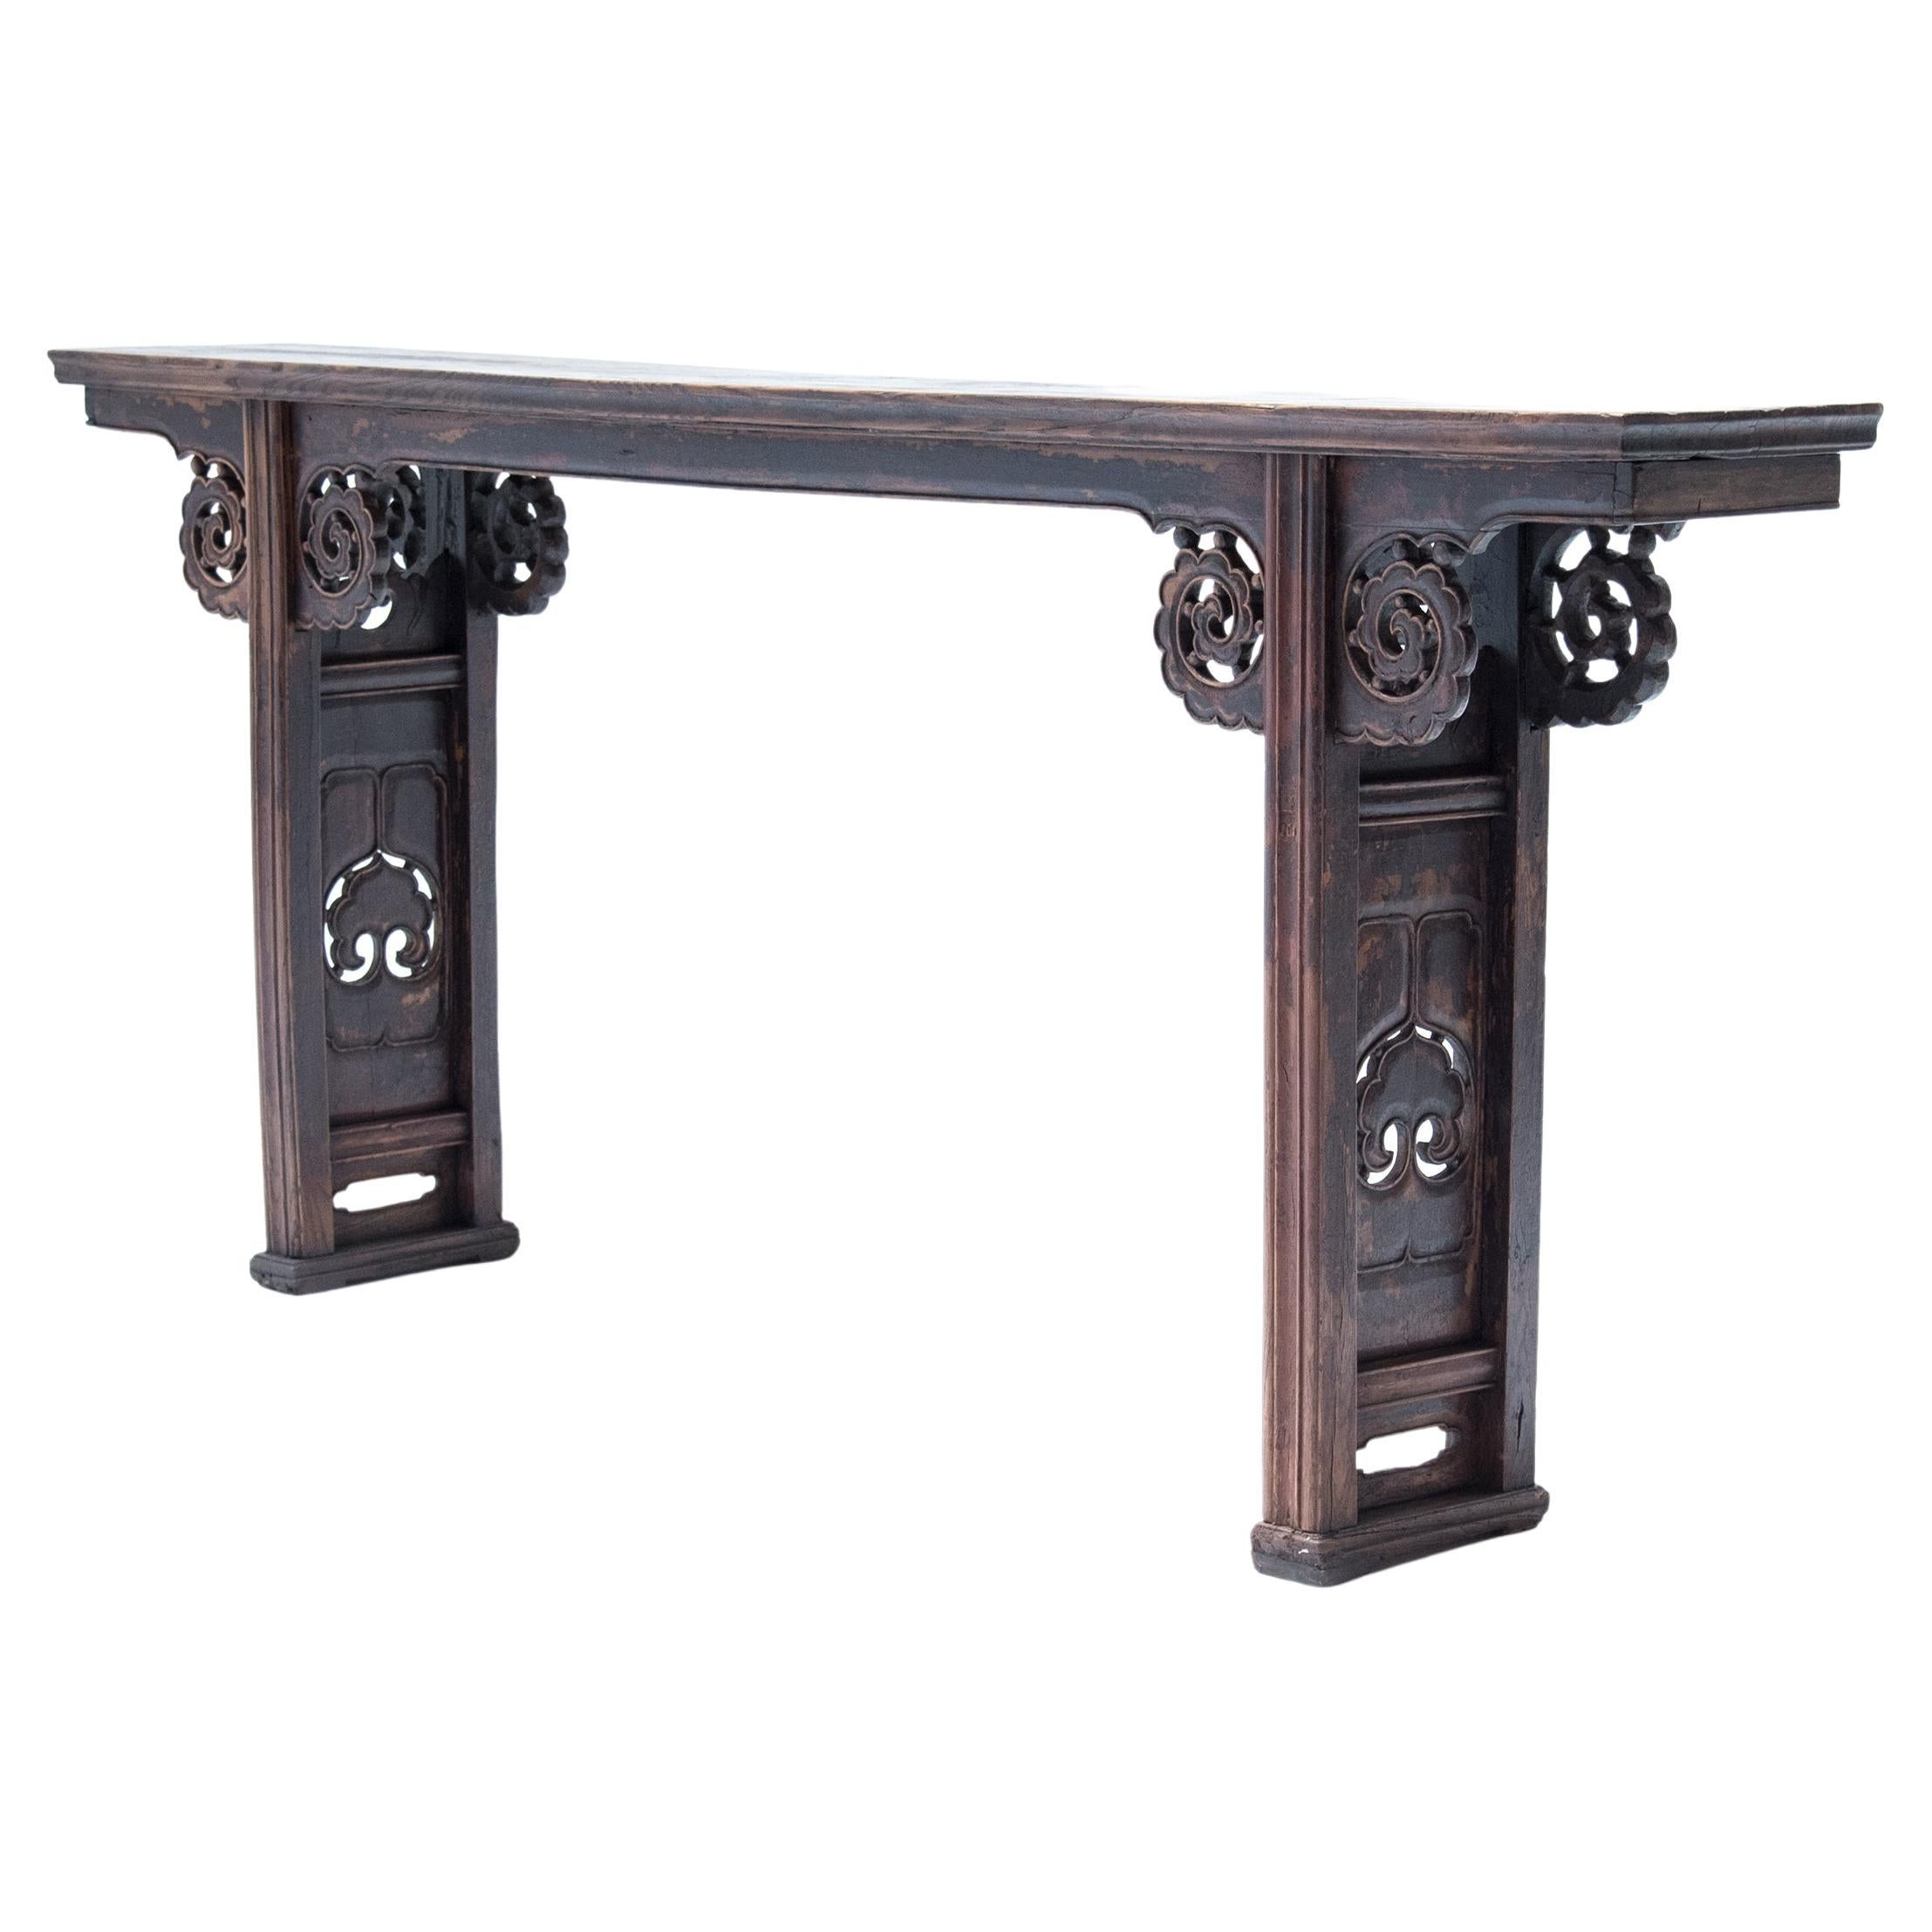 Chinese Altar Table with Inset Ruyi Panels, C. 1850